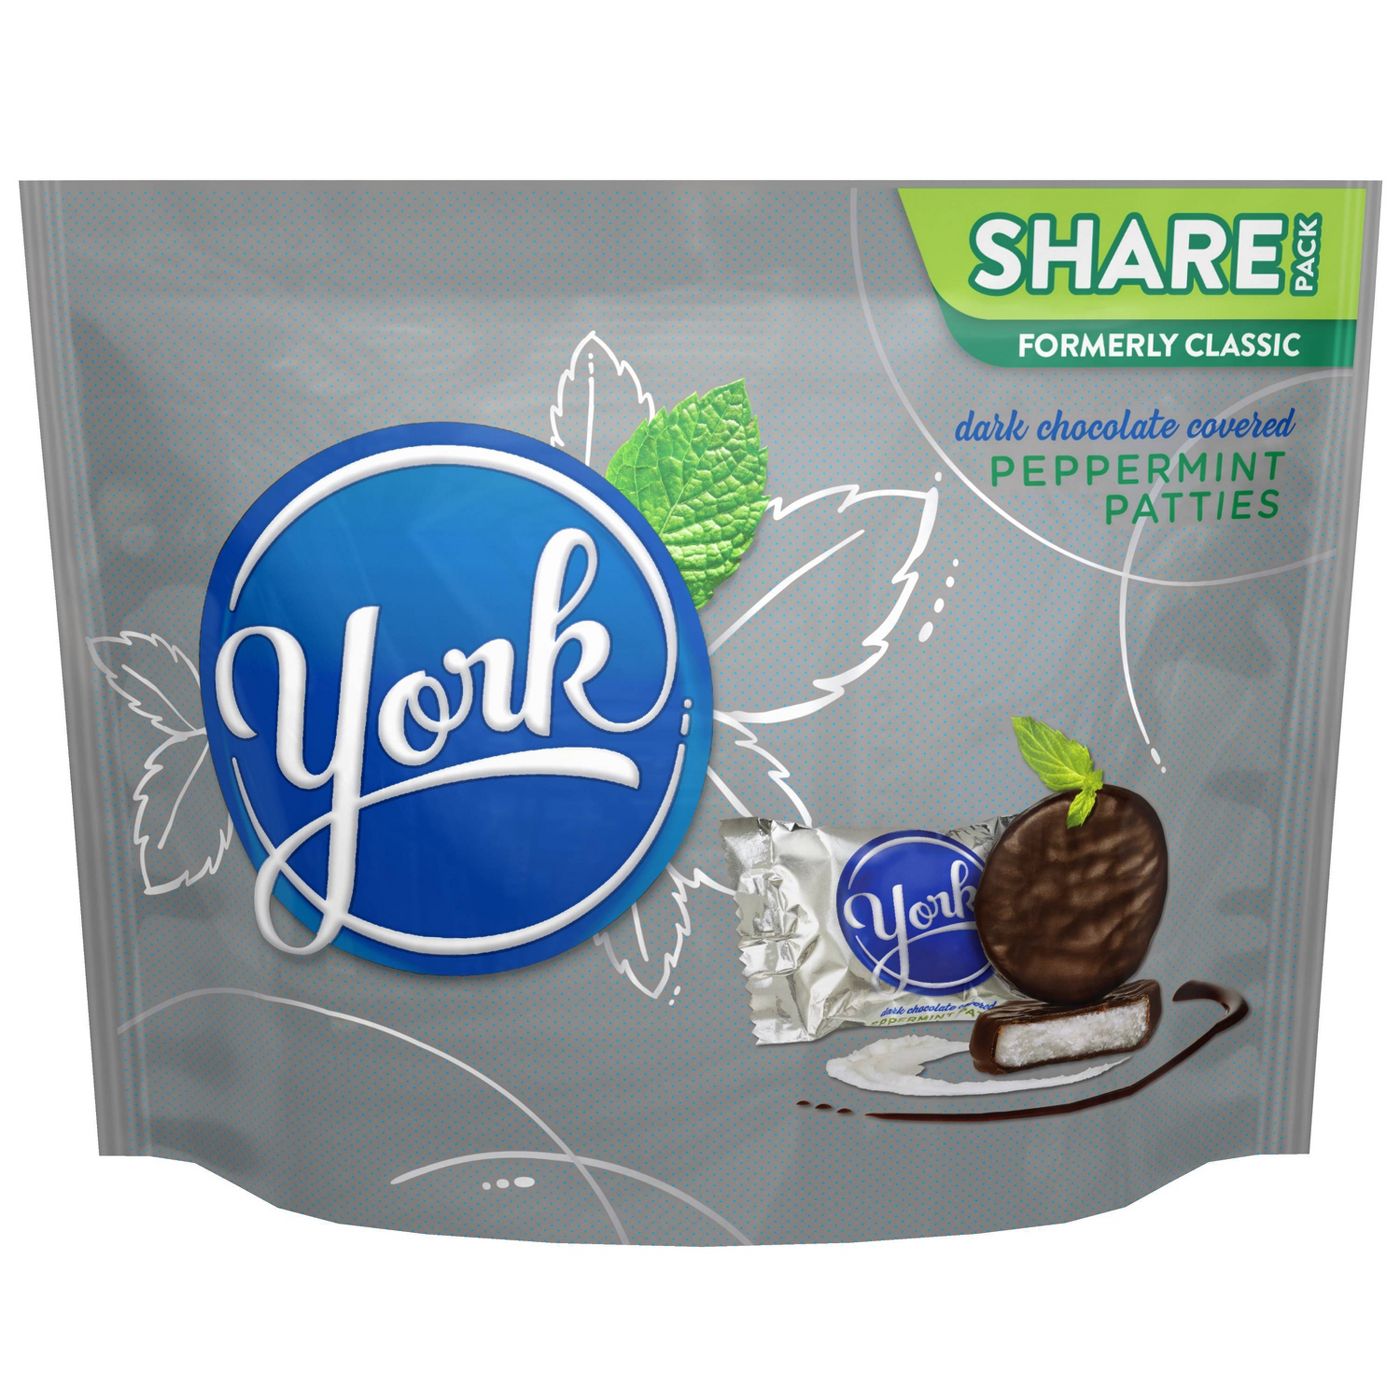 York Peppermint Patties Covered in Dark Chocolate, Share Pack, 10.1oz